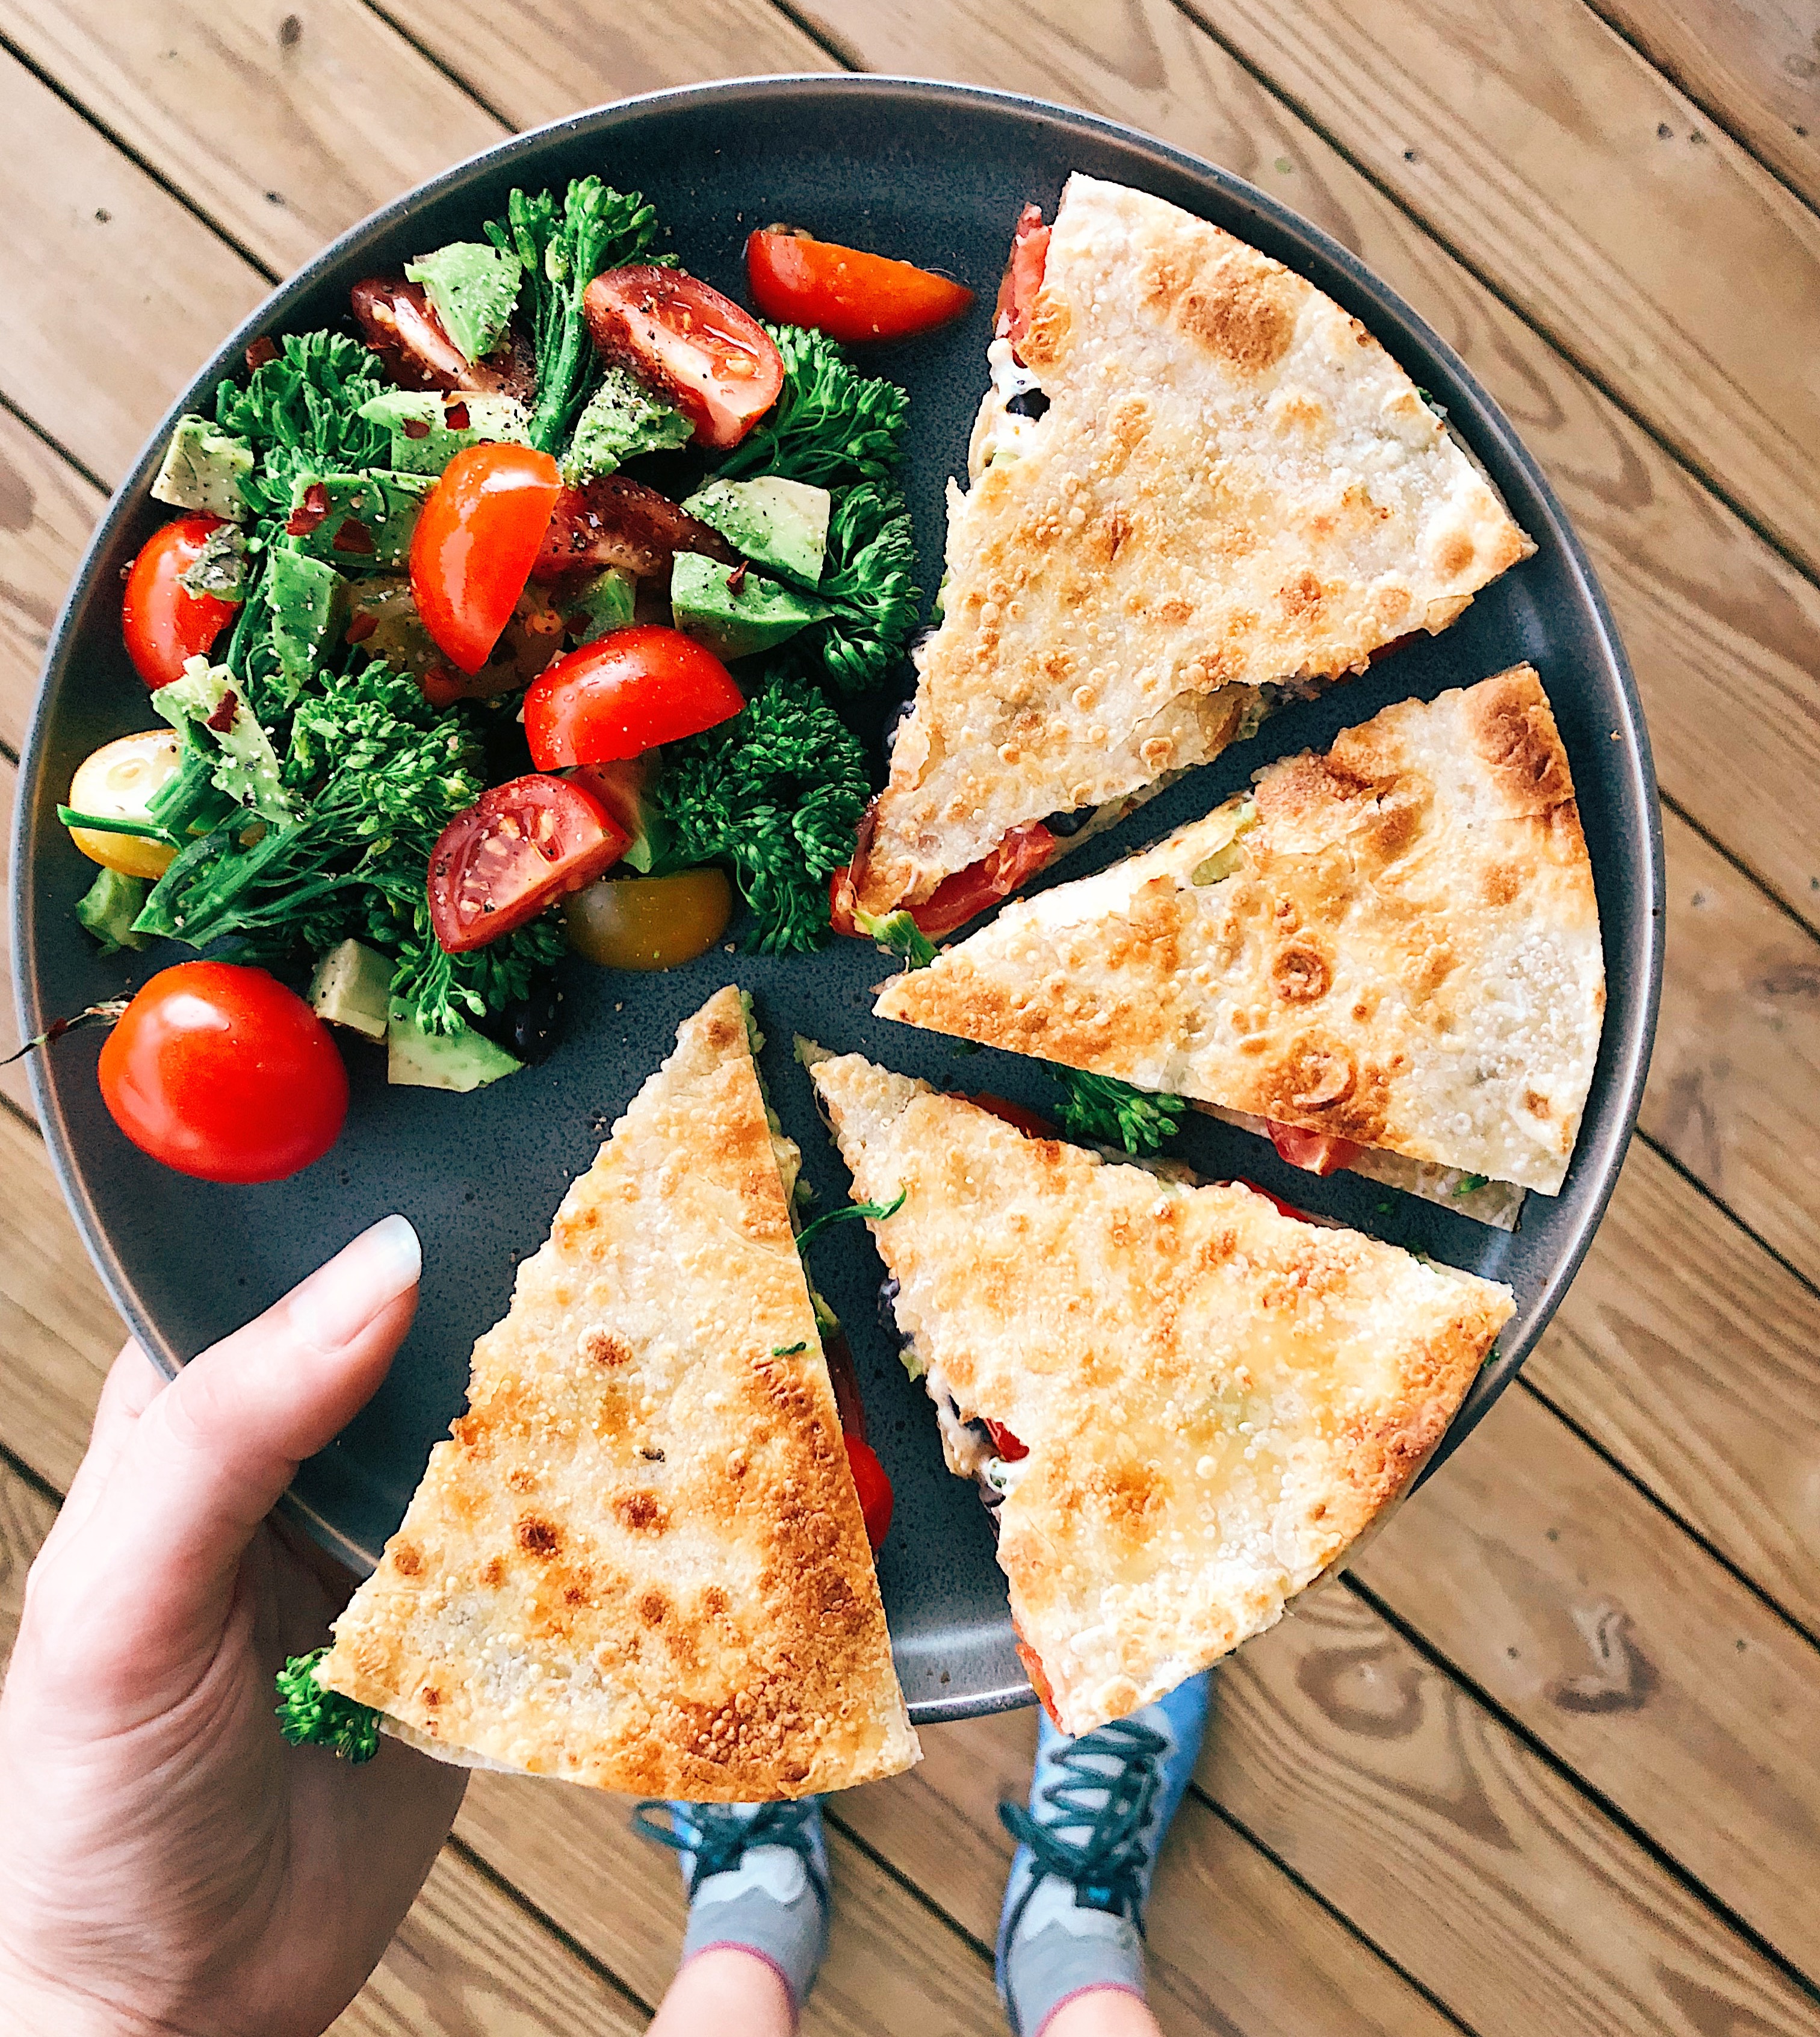 vegan quesadillas with broccolini salad on blue plate being held in the air